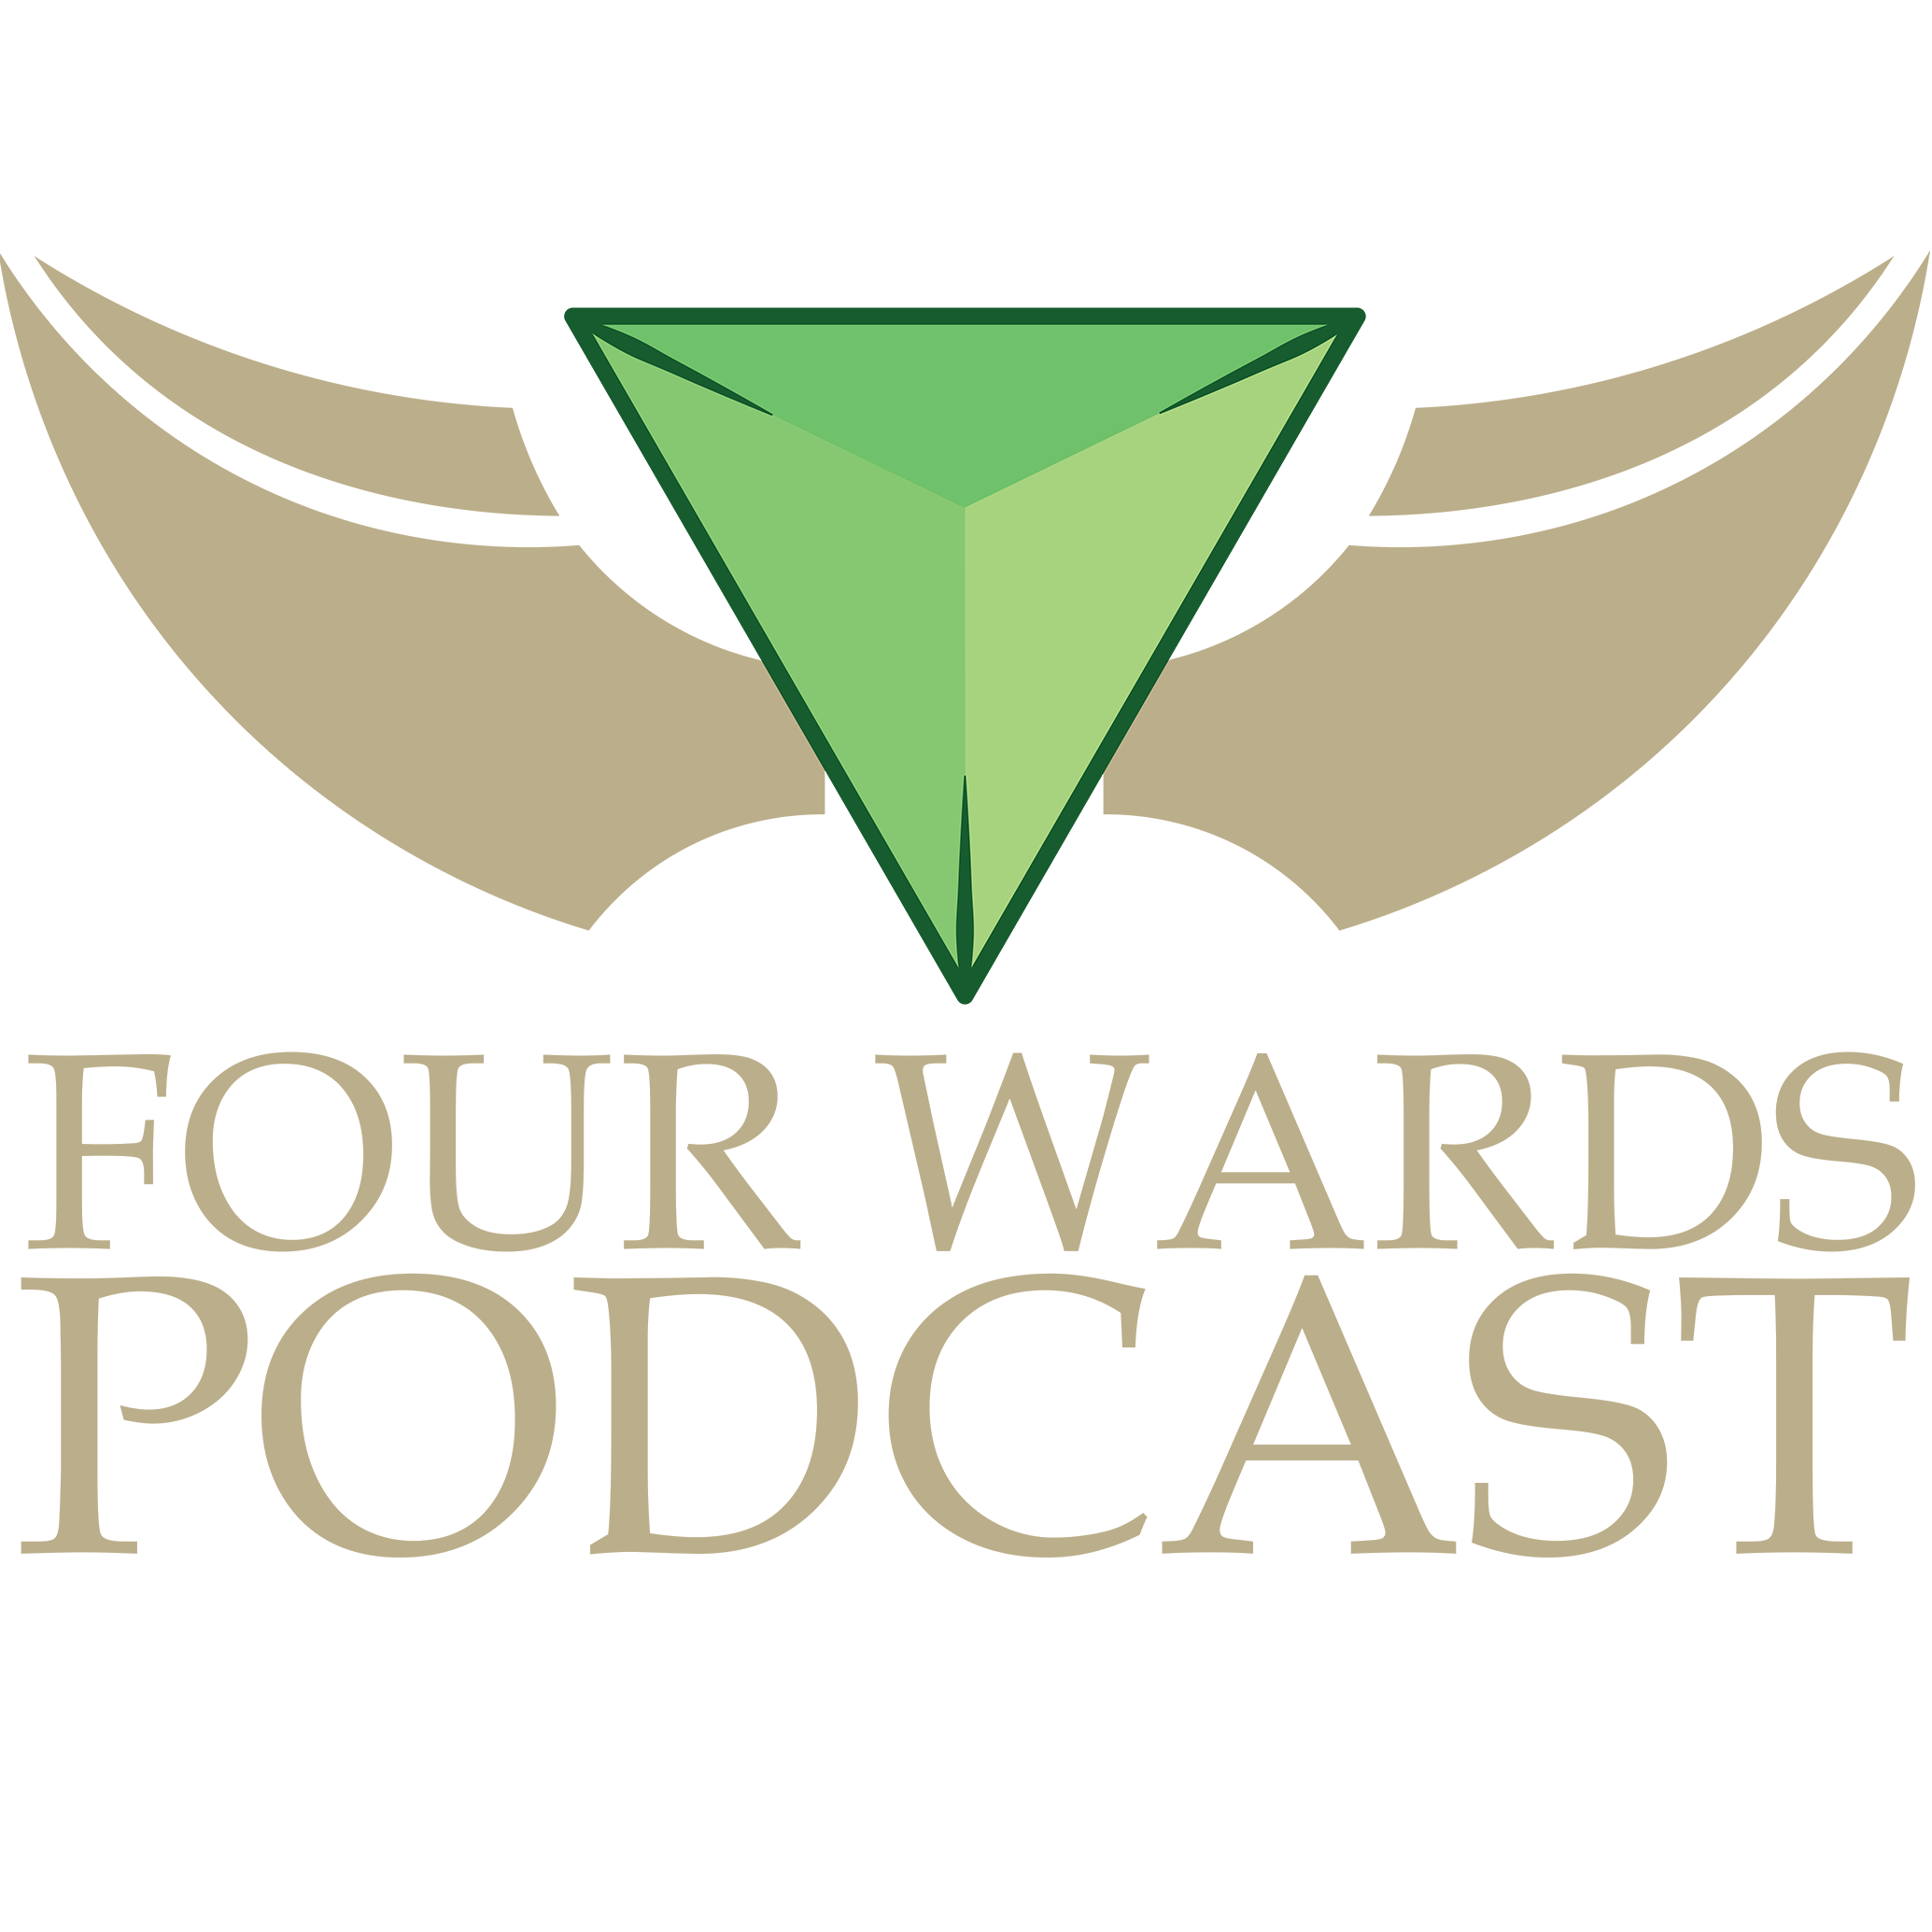 The Four Wards Podcast - Episode 435: Shame on LCS